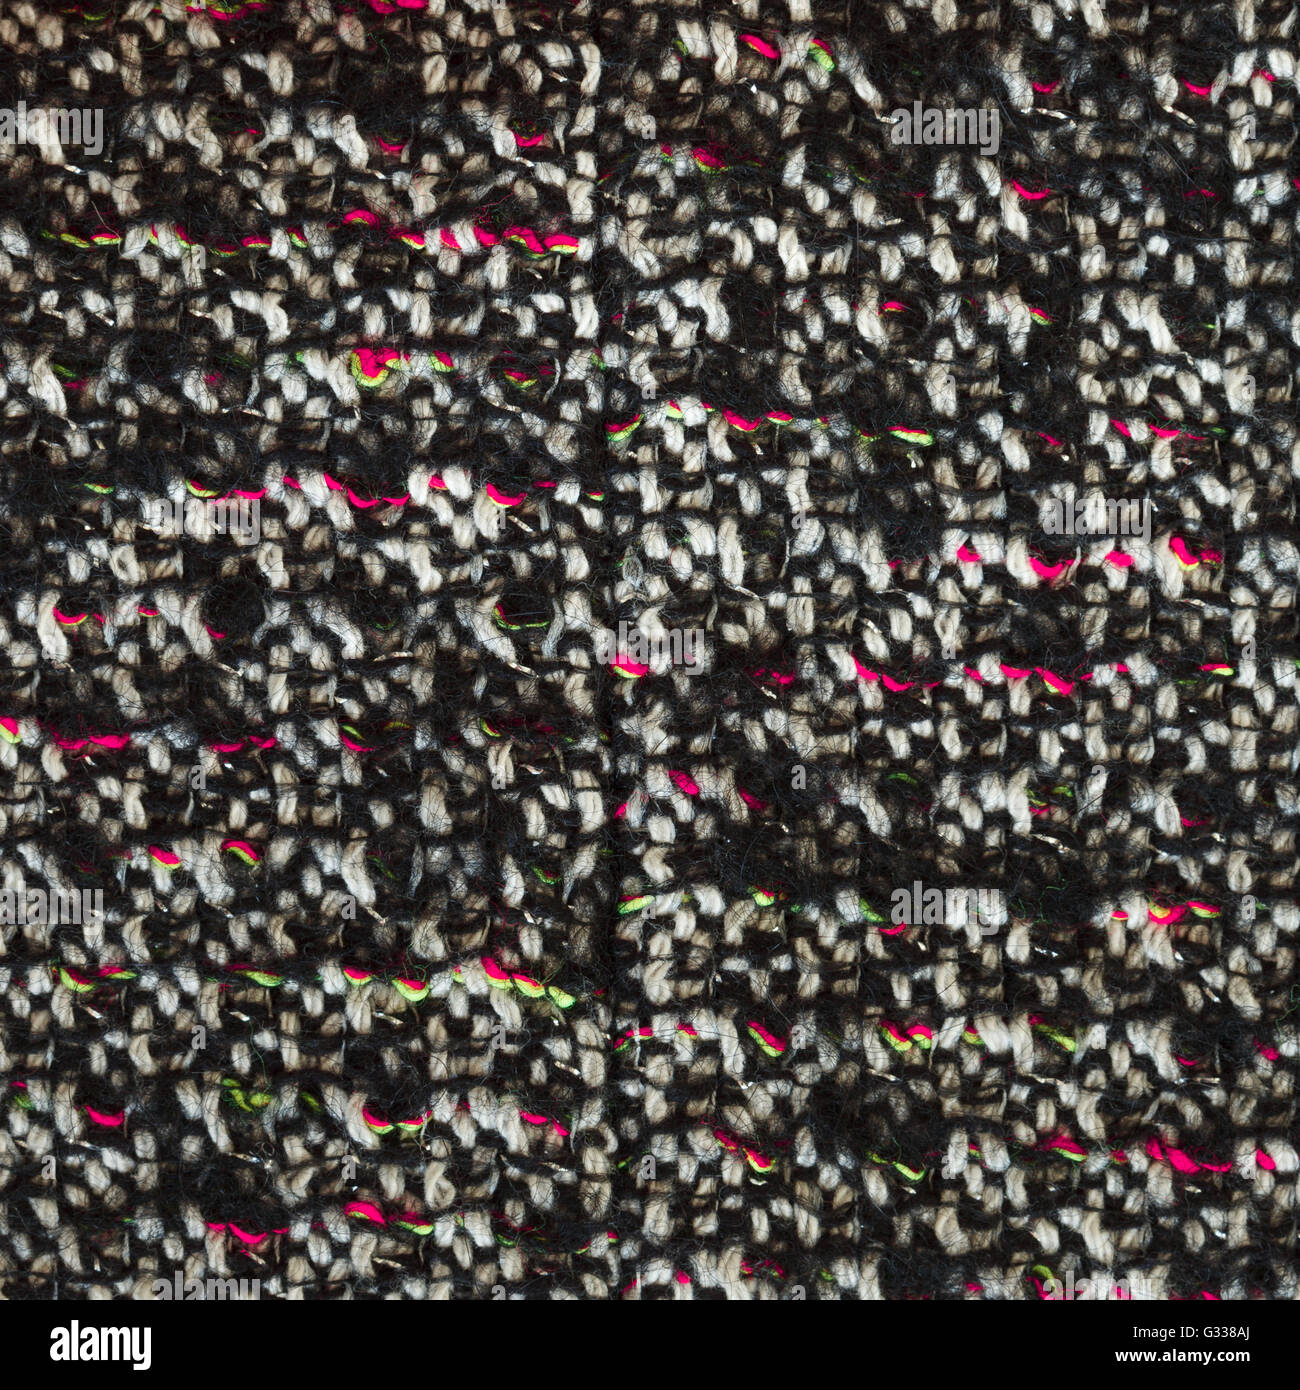 Bottle green woven woolen fabric texture. Black, white, red, magenta complicated melange. Close up fragment of the top view. Stock Photo